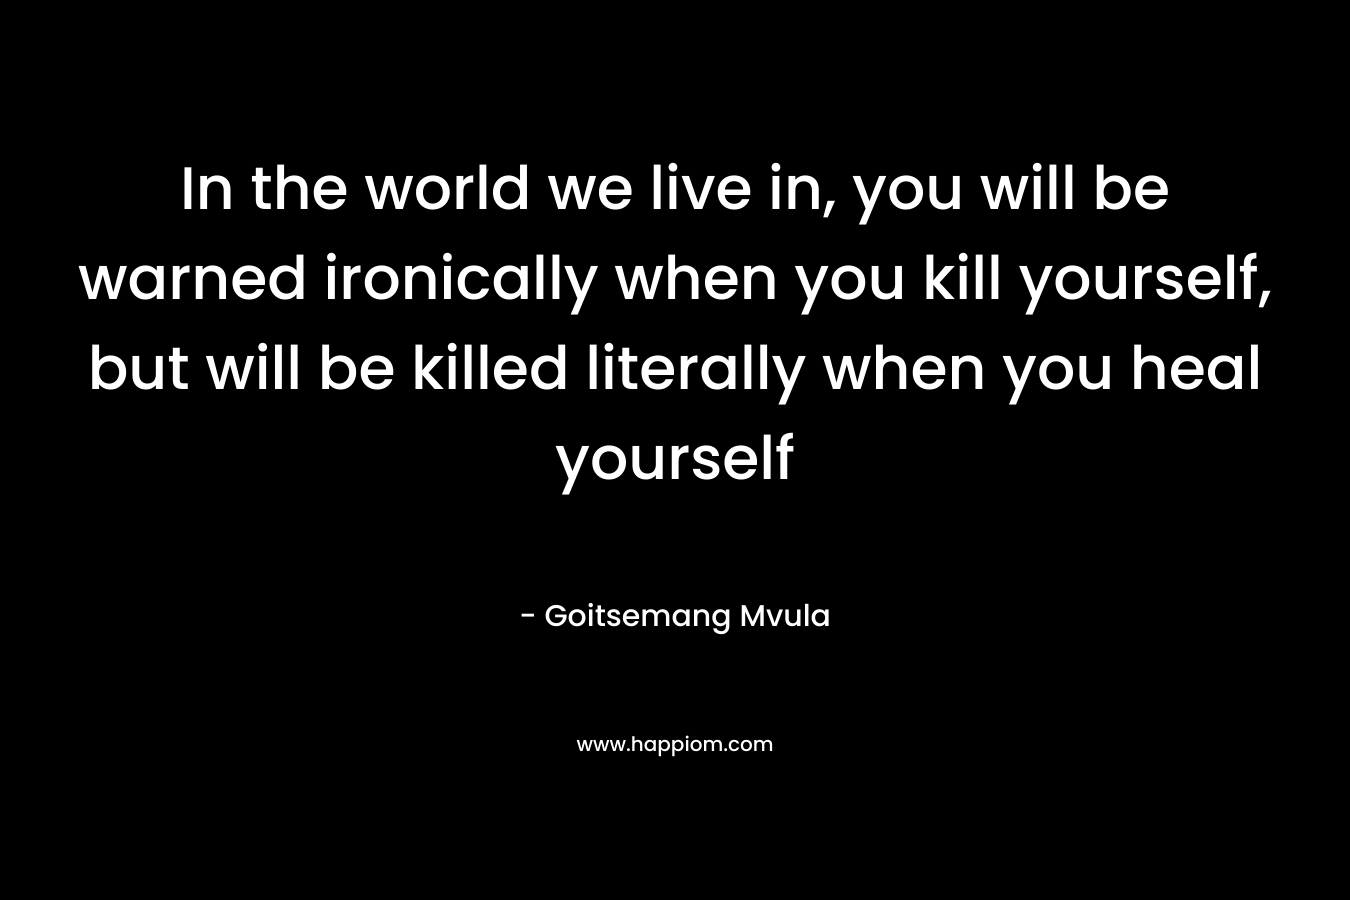 In the world we live in, you will be warned ironically when you kill yourself, but will be killed literally when you heal yourself